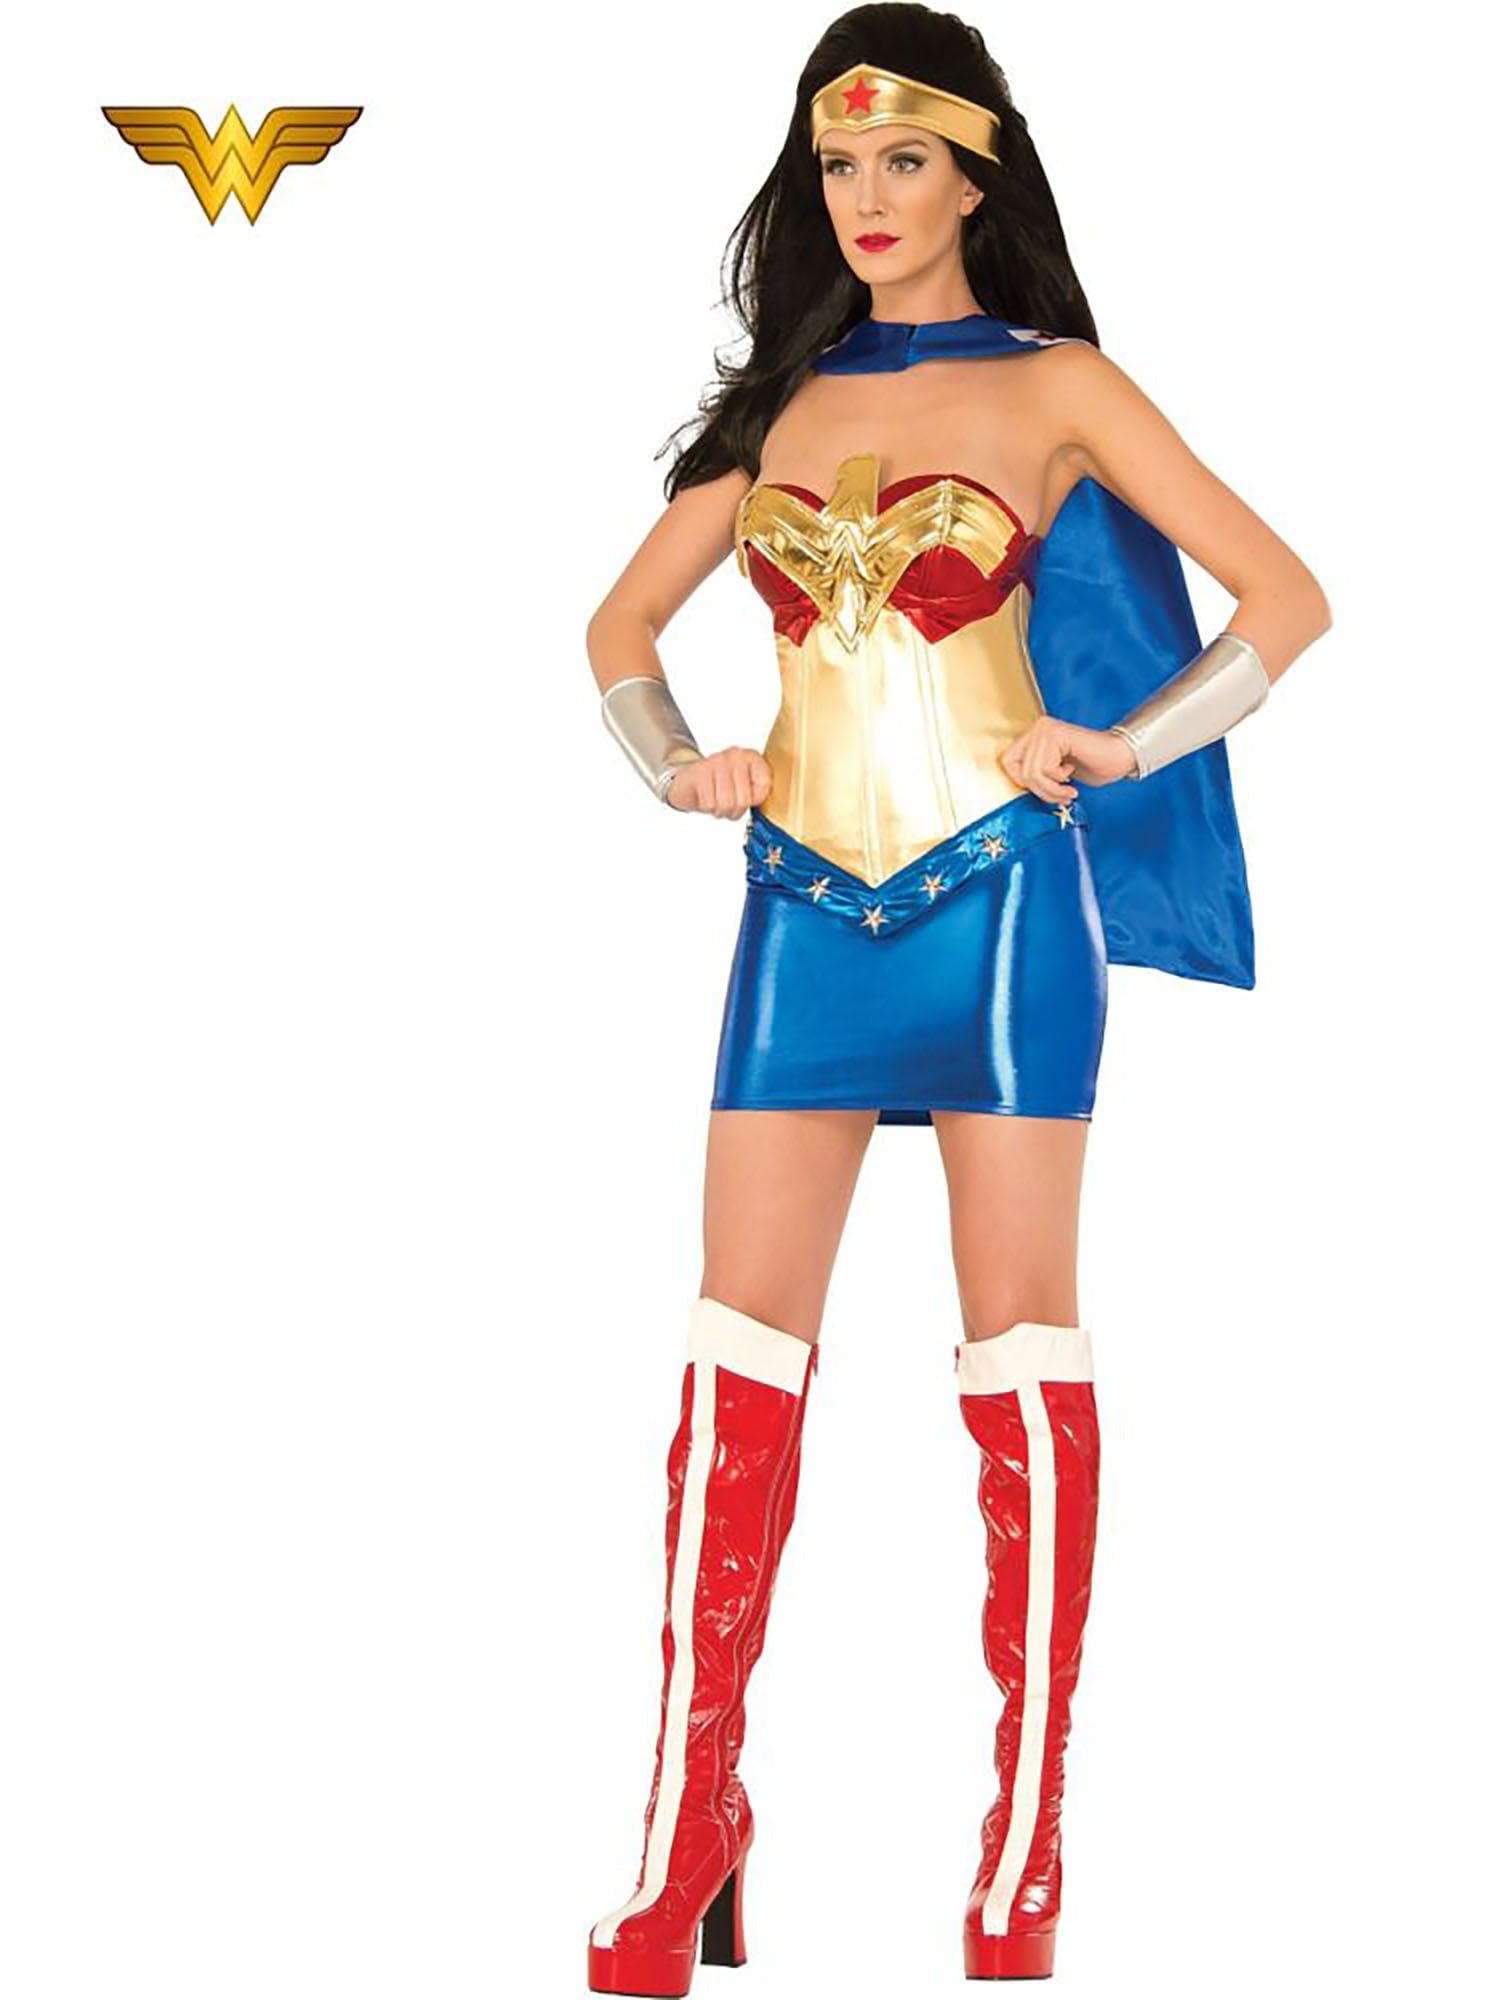 Adult Deluxe Wonder Woman Costume - costumes.com